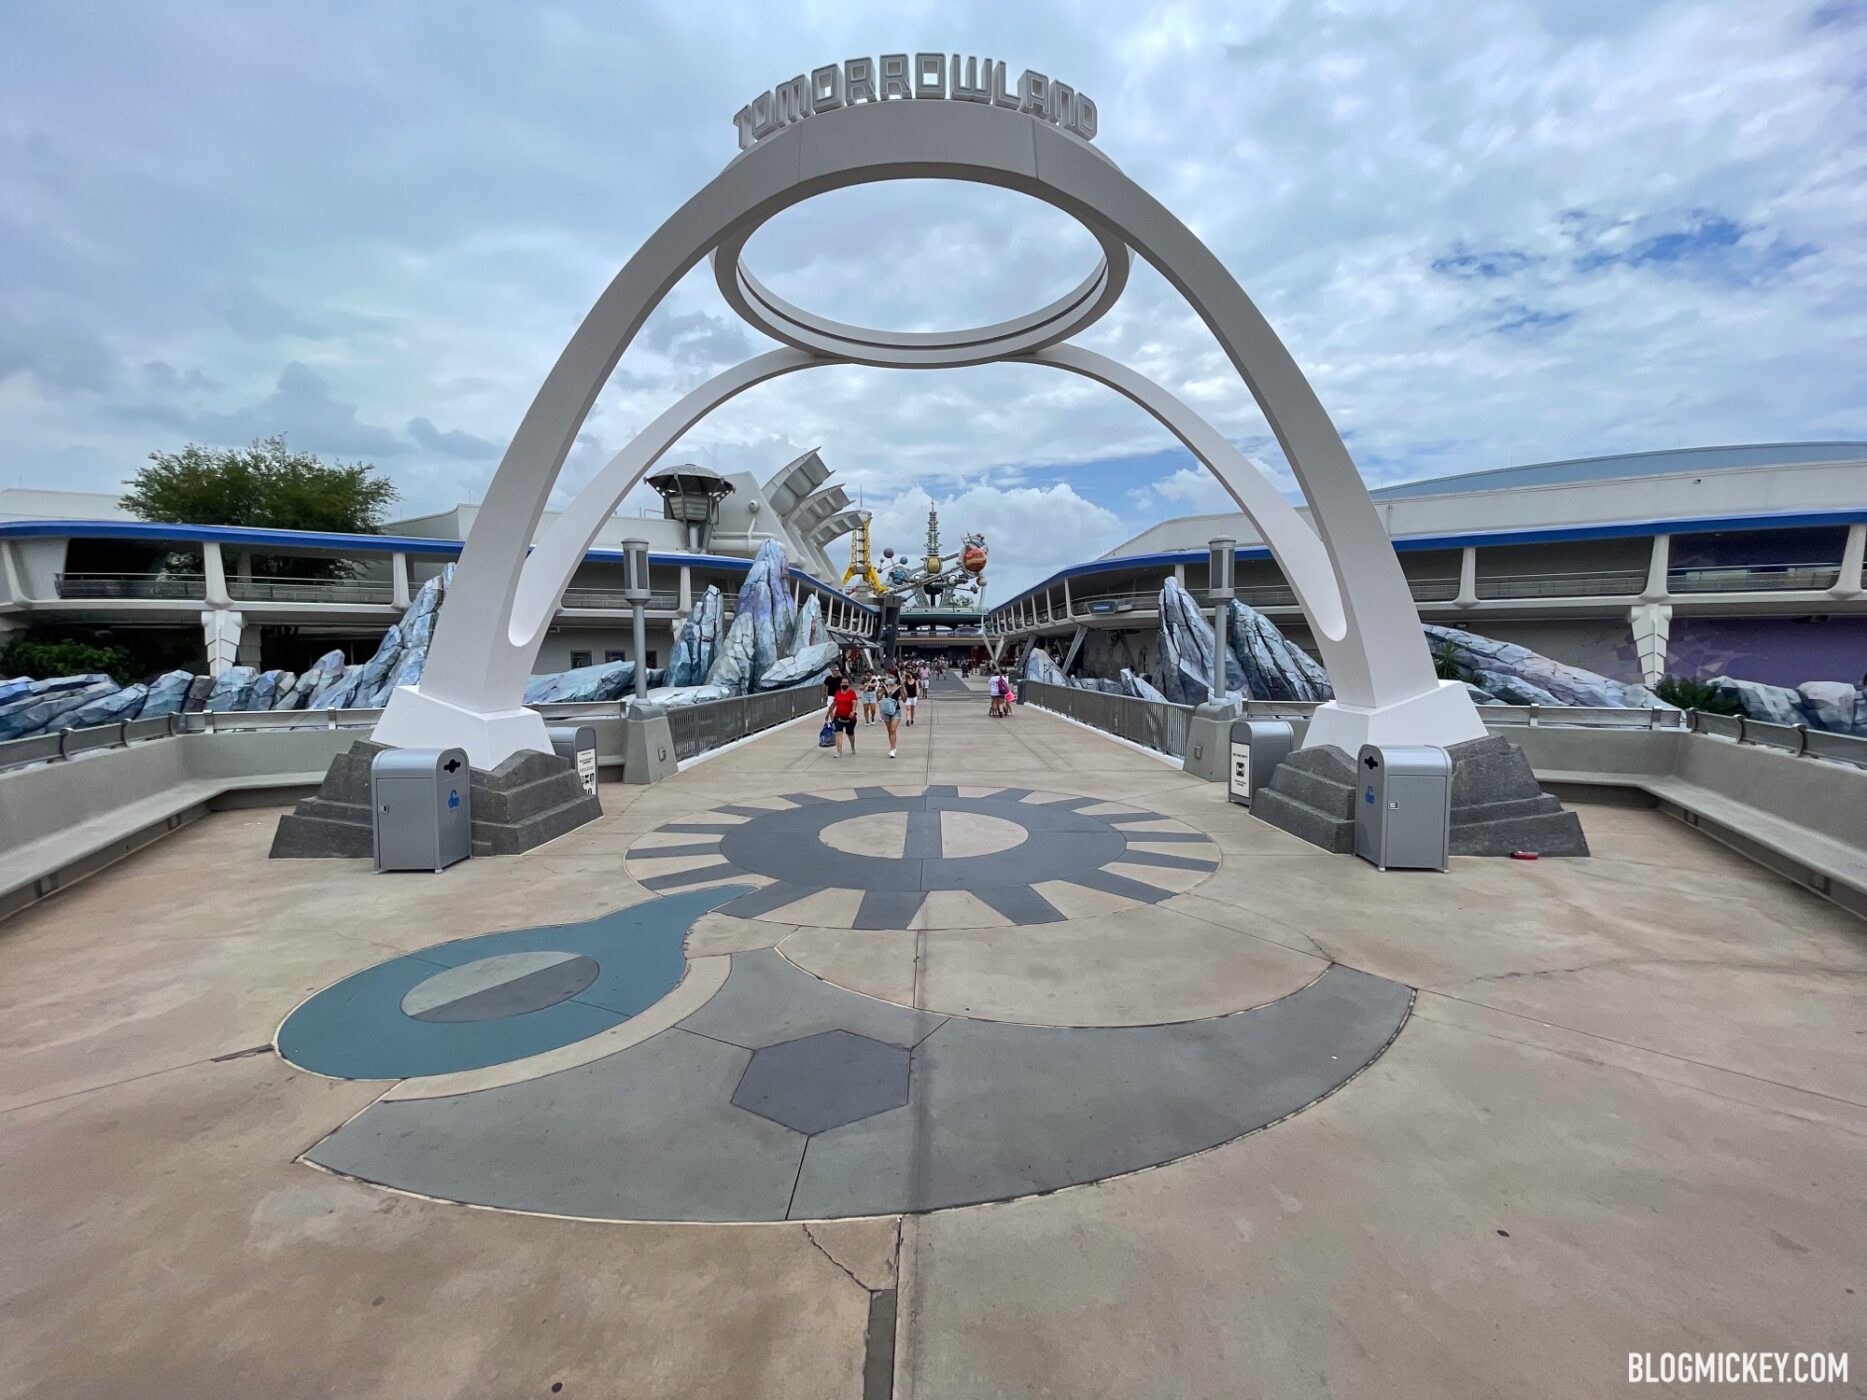 Disney Rolls Out the Grey Carpet in Tomorrowland as Pavement Replacement  Project Continues at Magic Kingdom